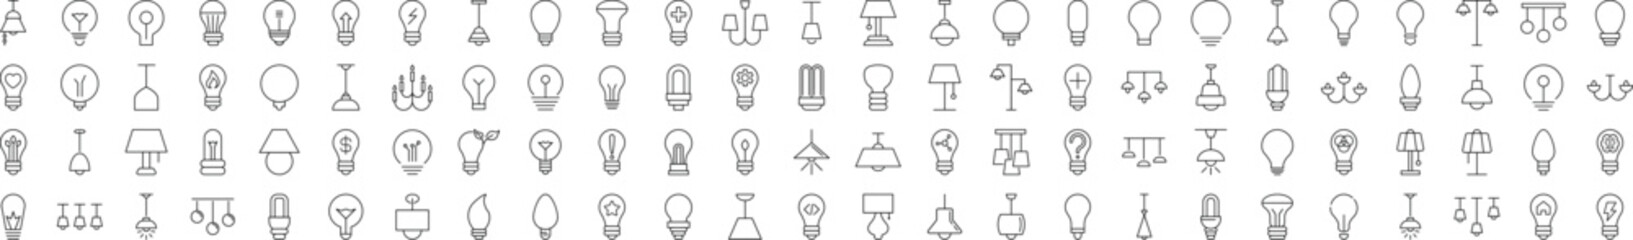 Tree and Forest Linear Icons. Perfect for design, infographics, web sites, apps